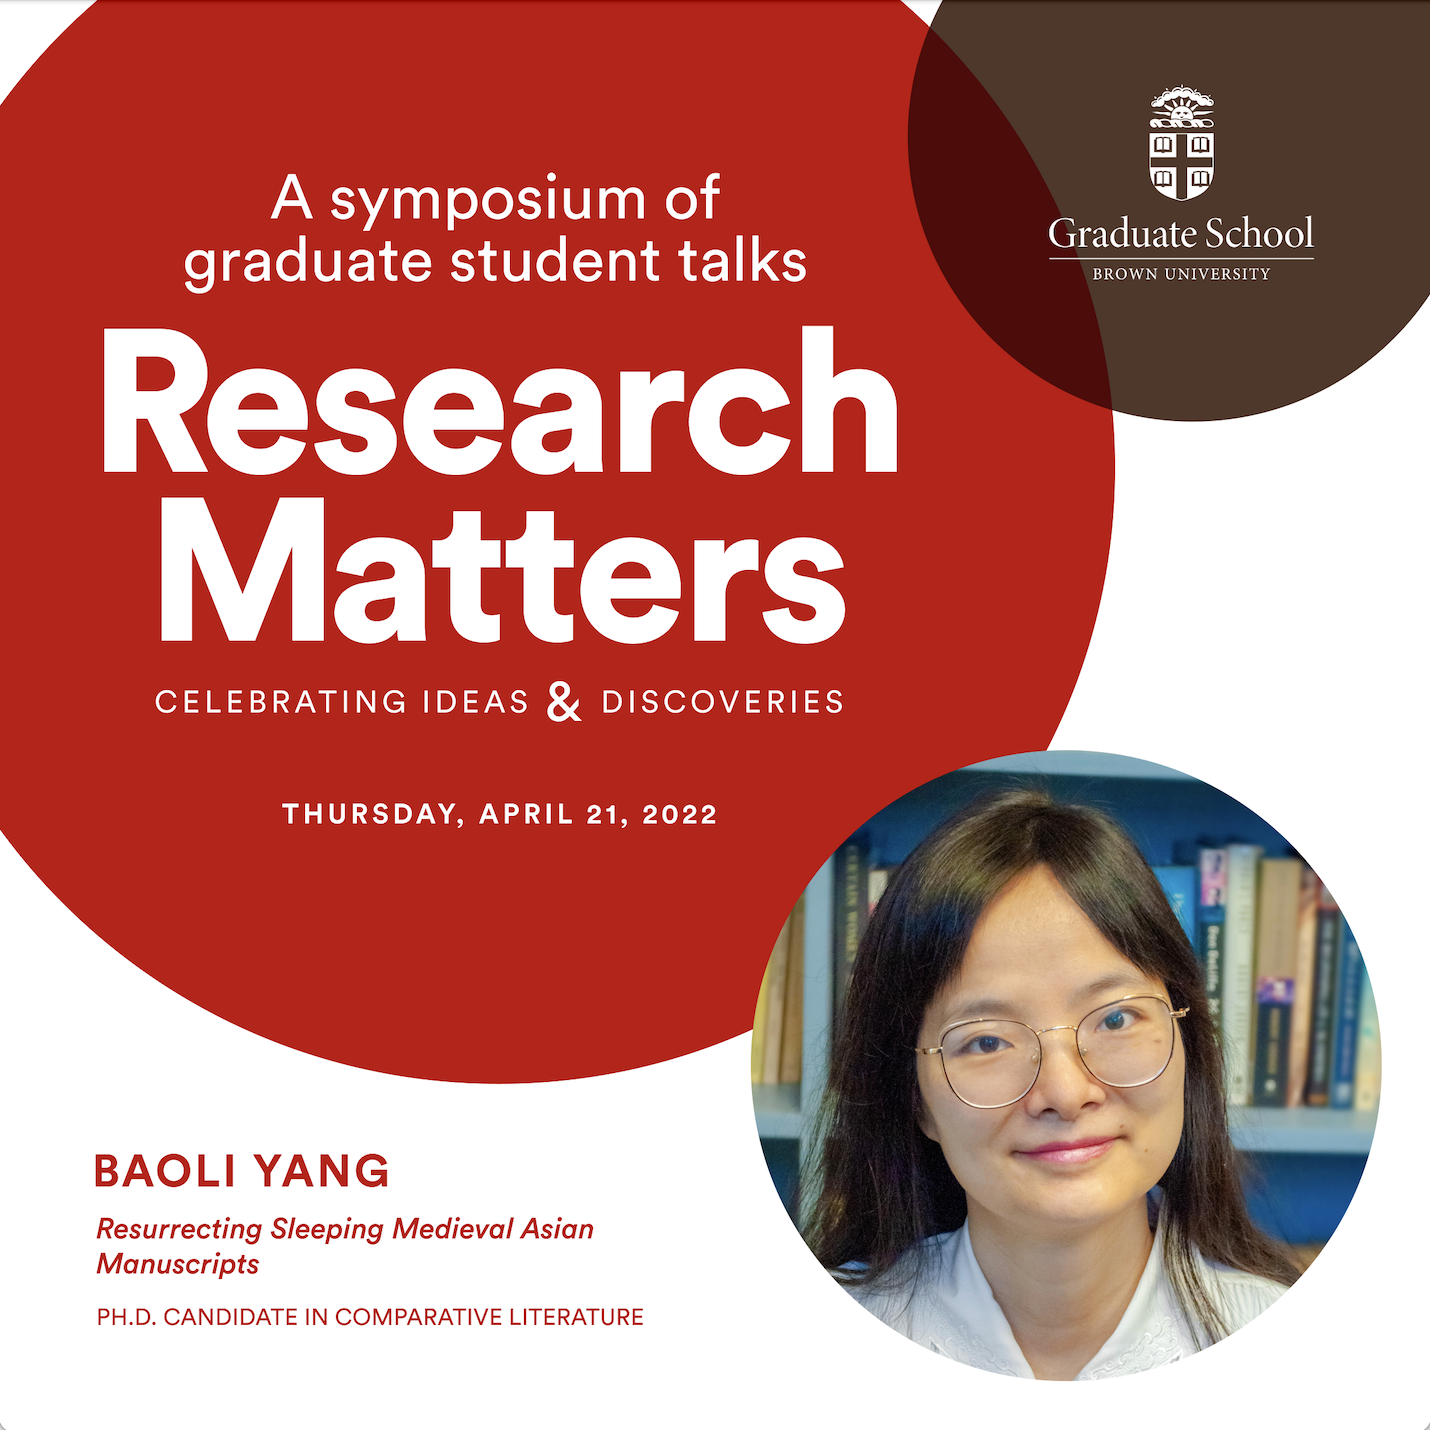 Research Matters flyer